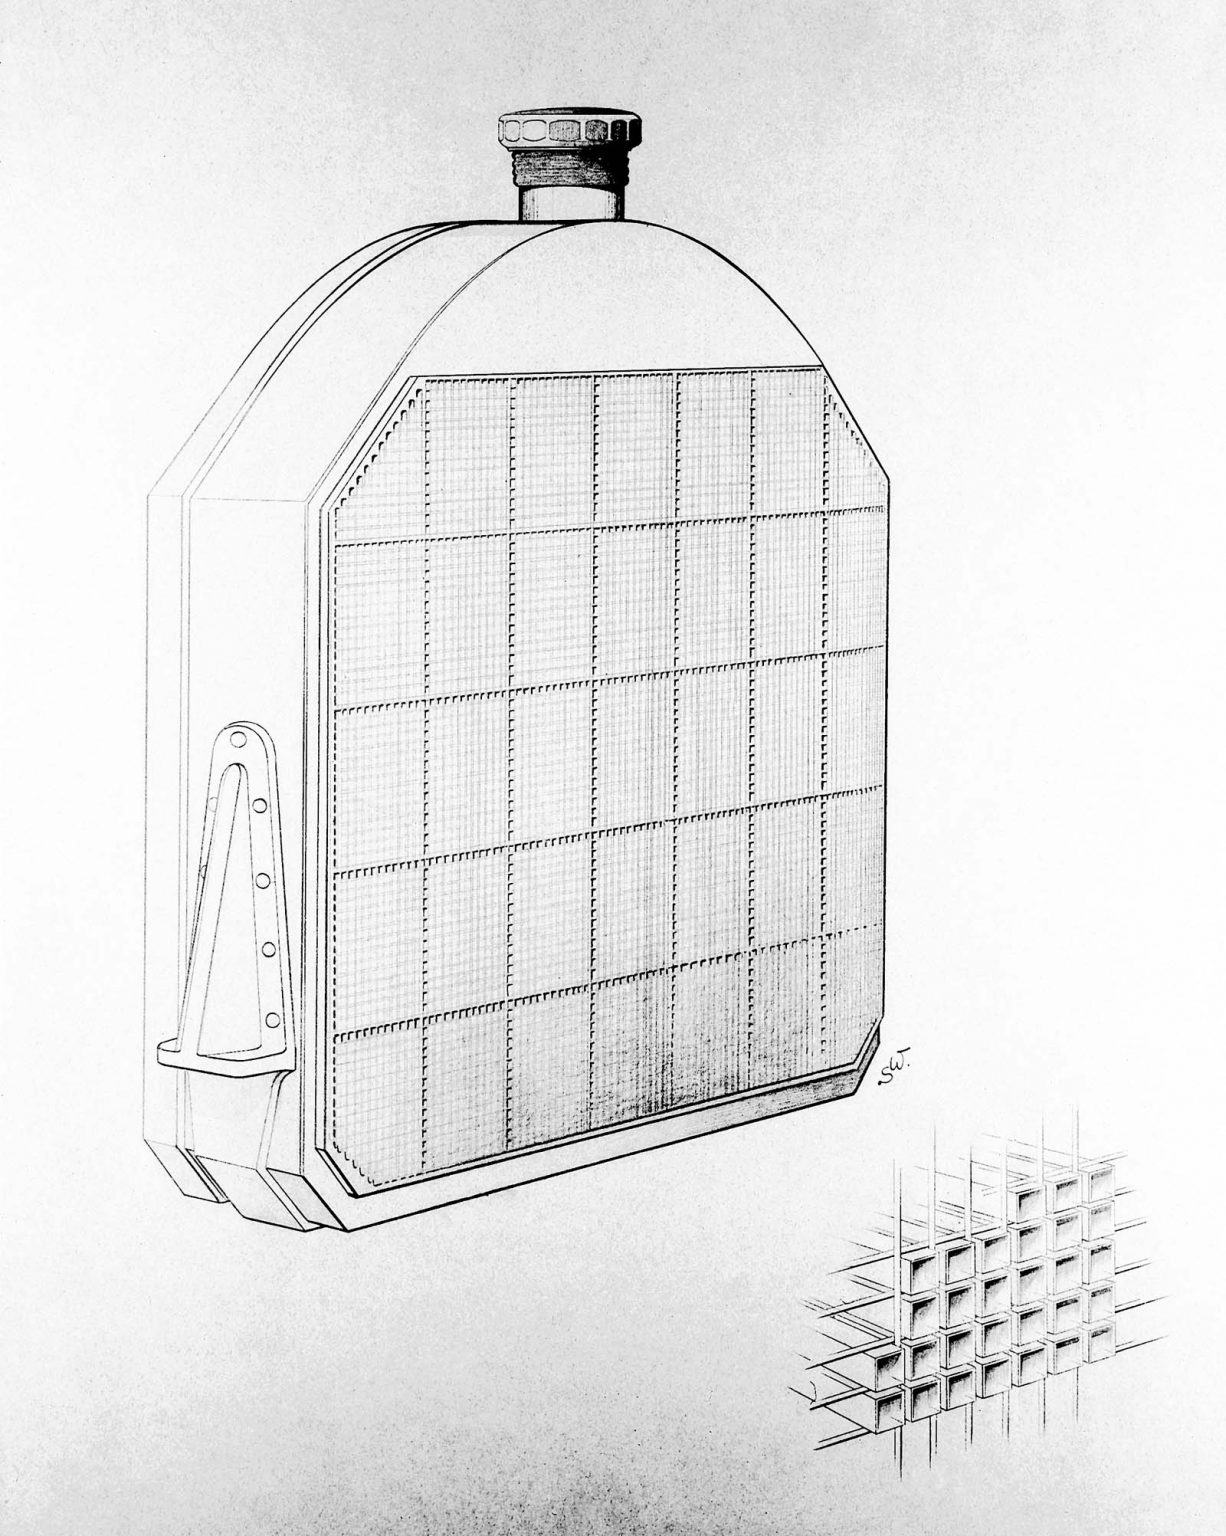 Drawing of the honeycomb radiator invented by Wilhelm Maybach